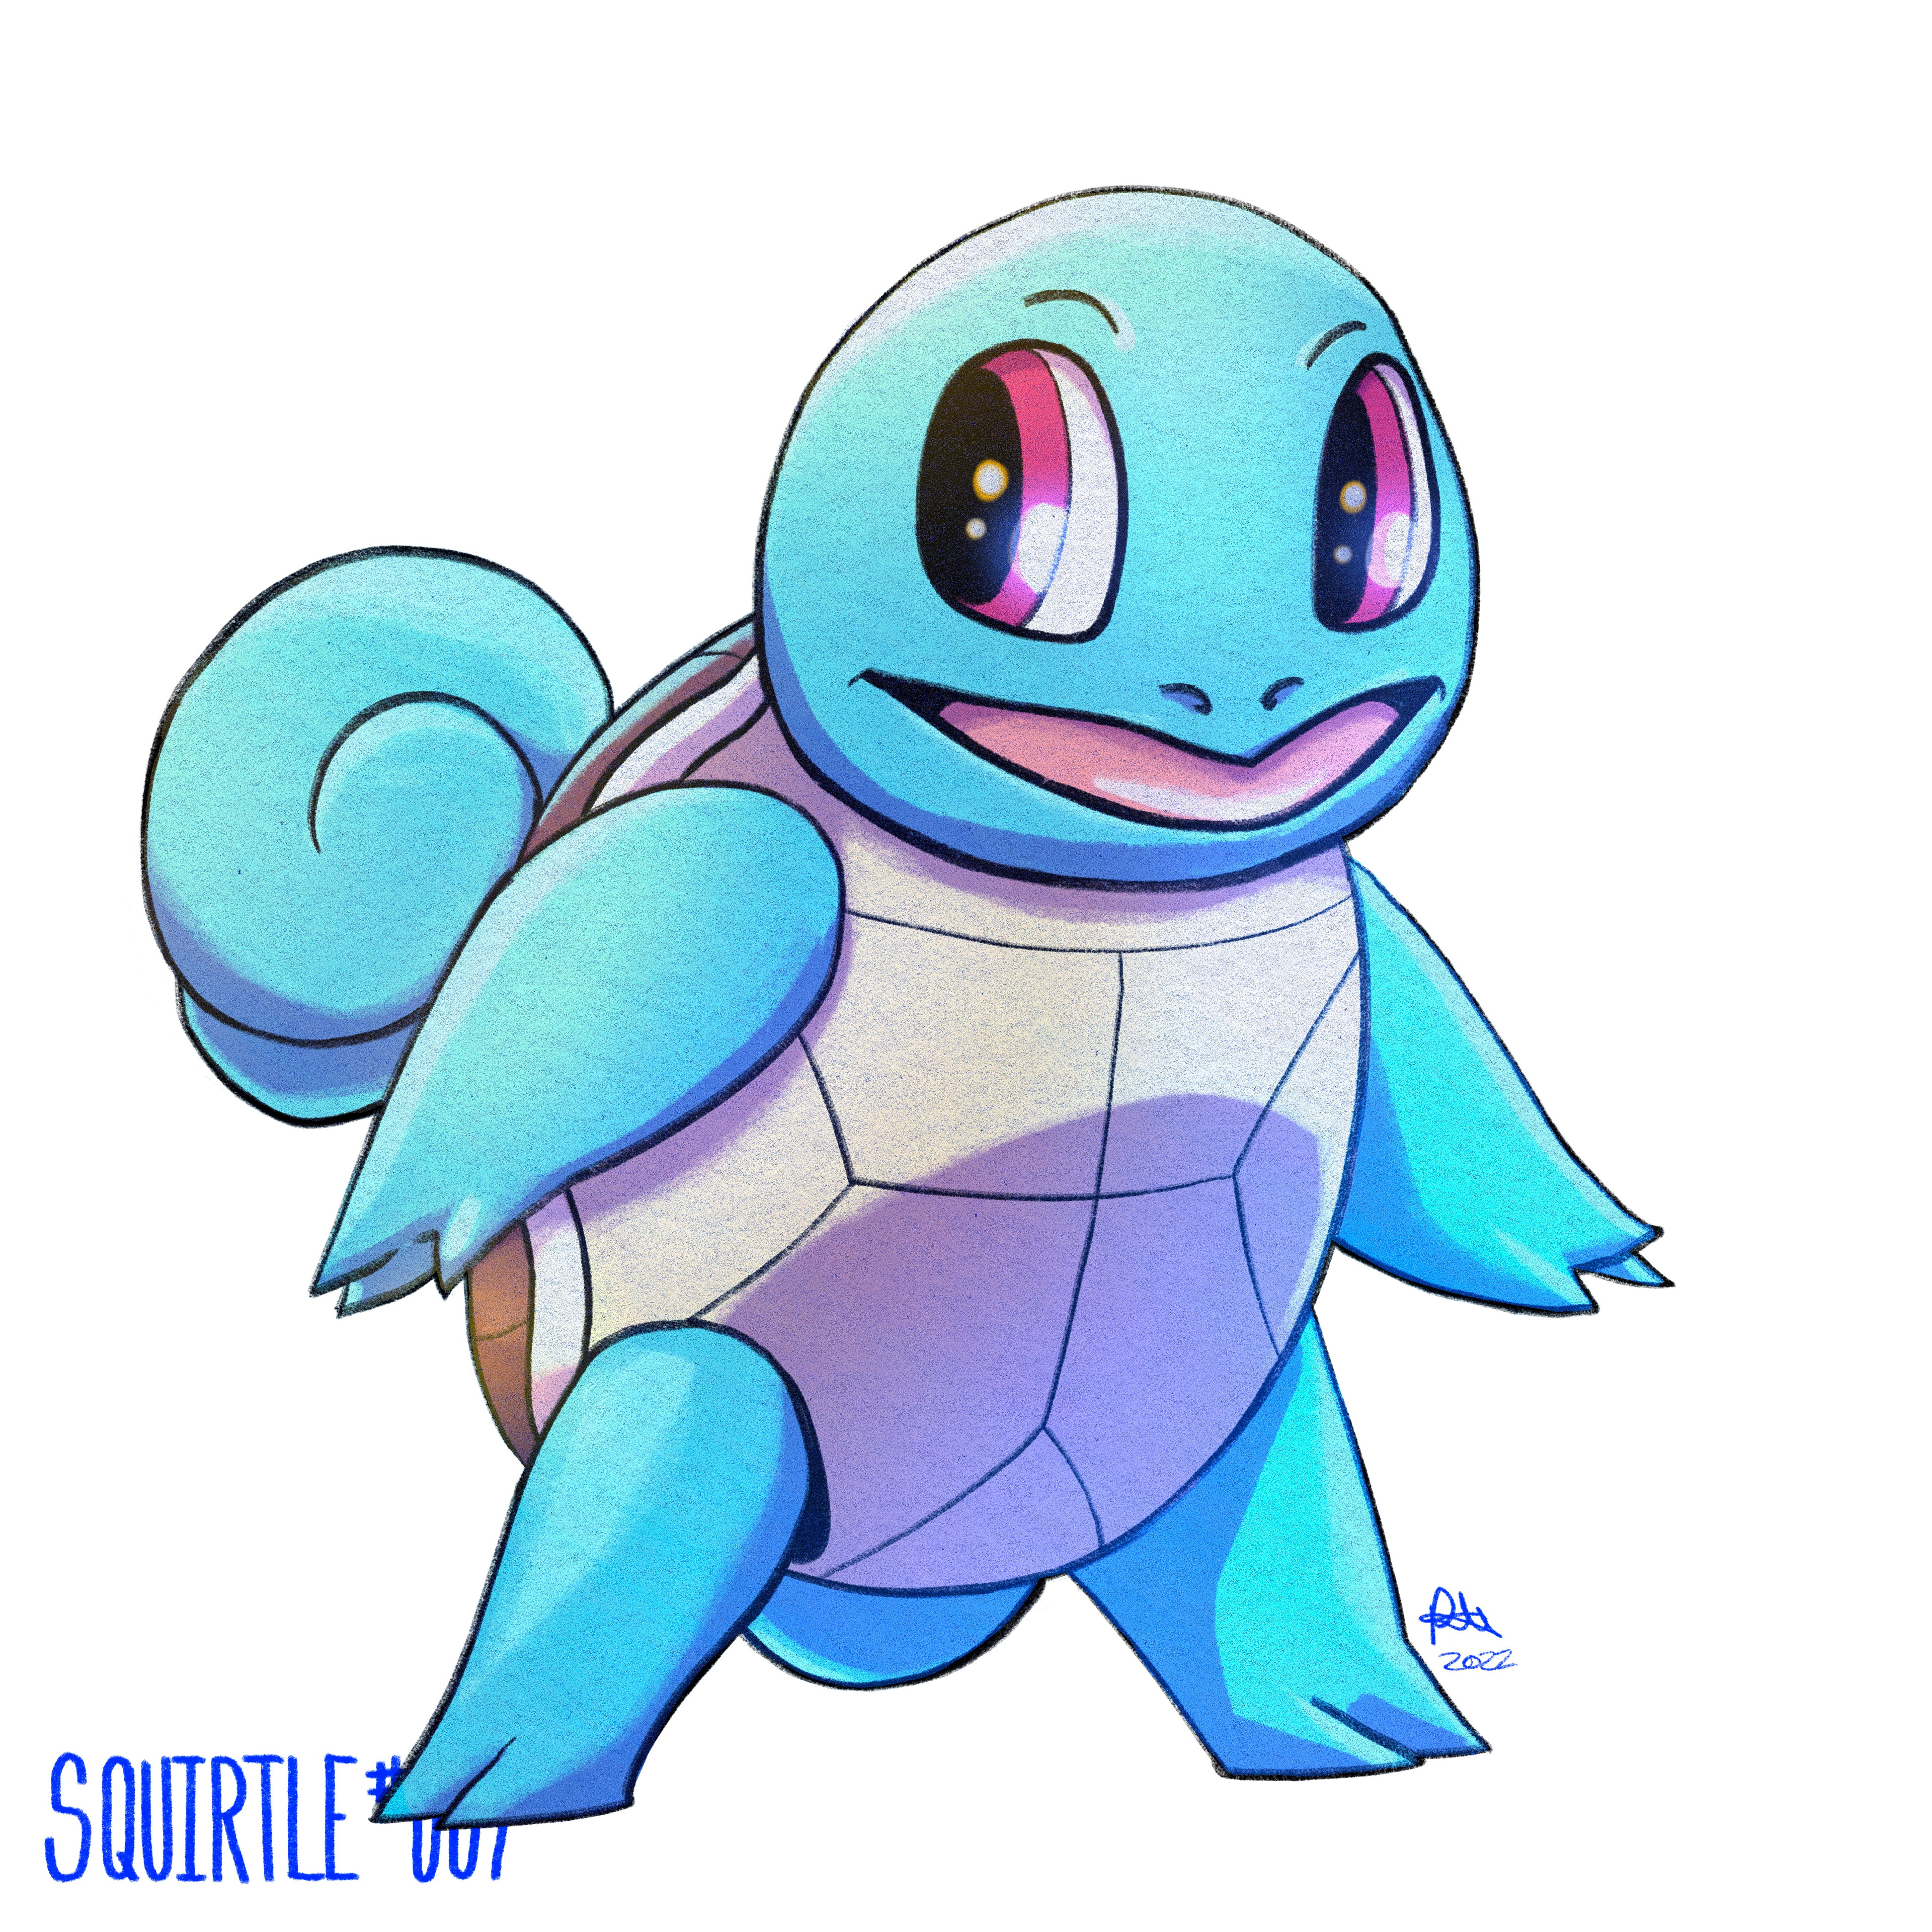 Squirtle - Blue